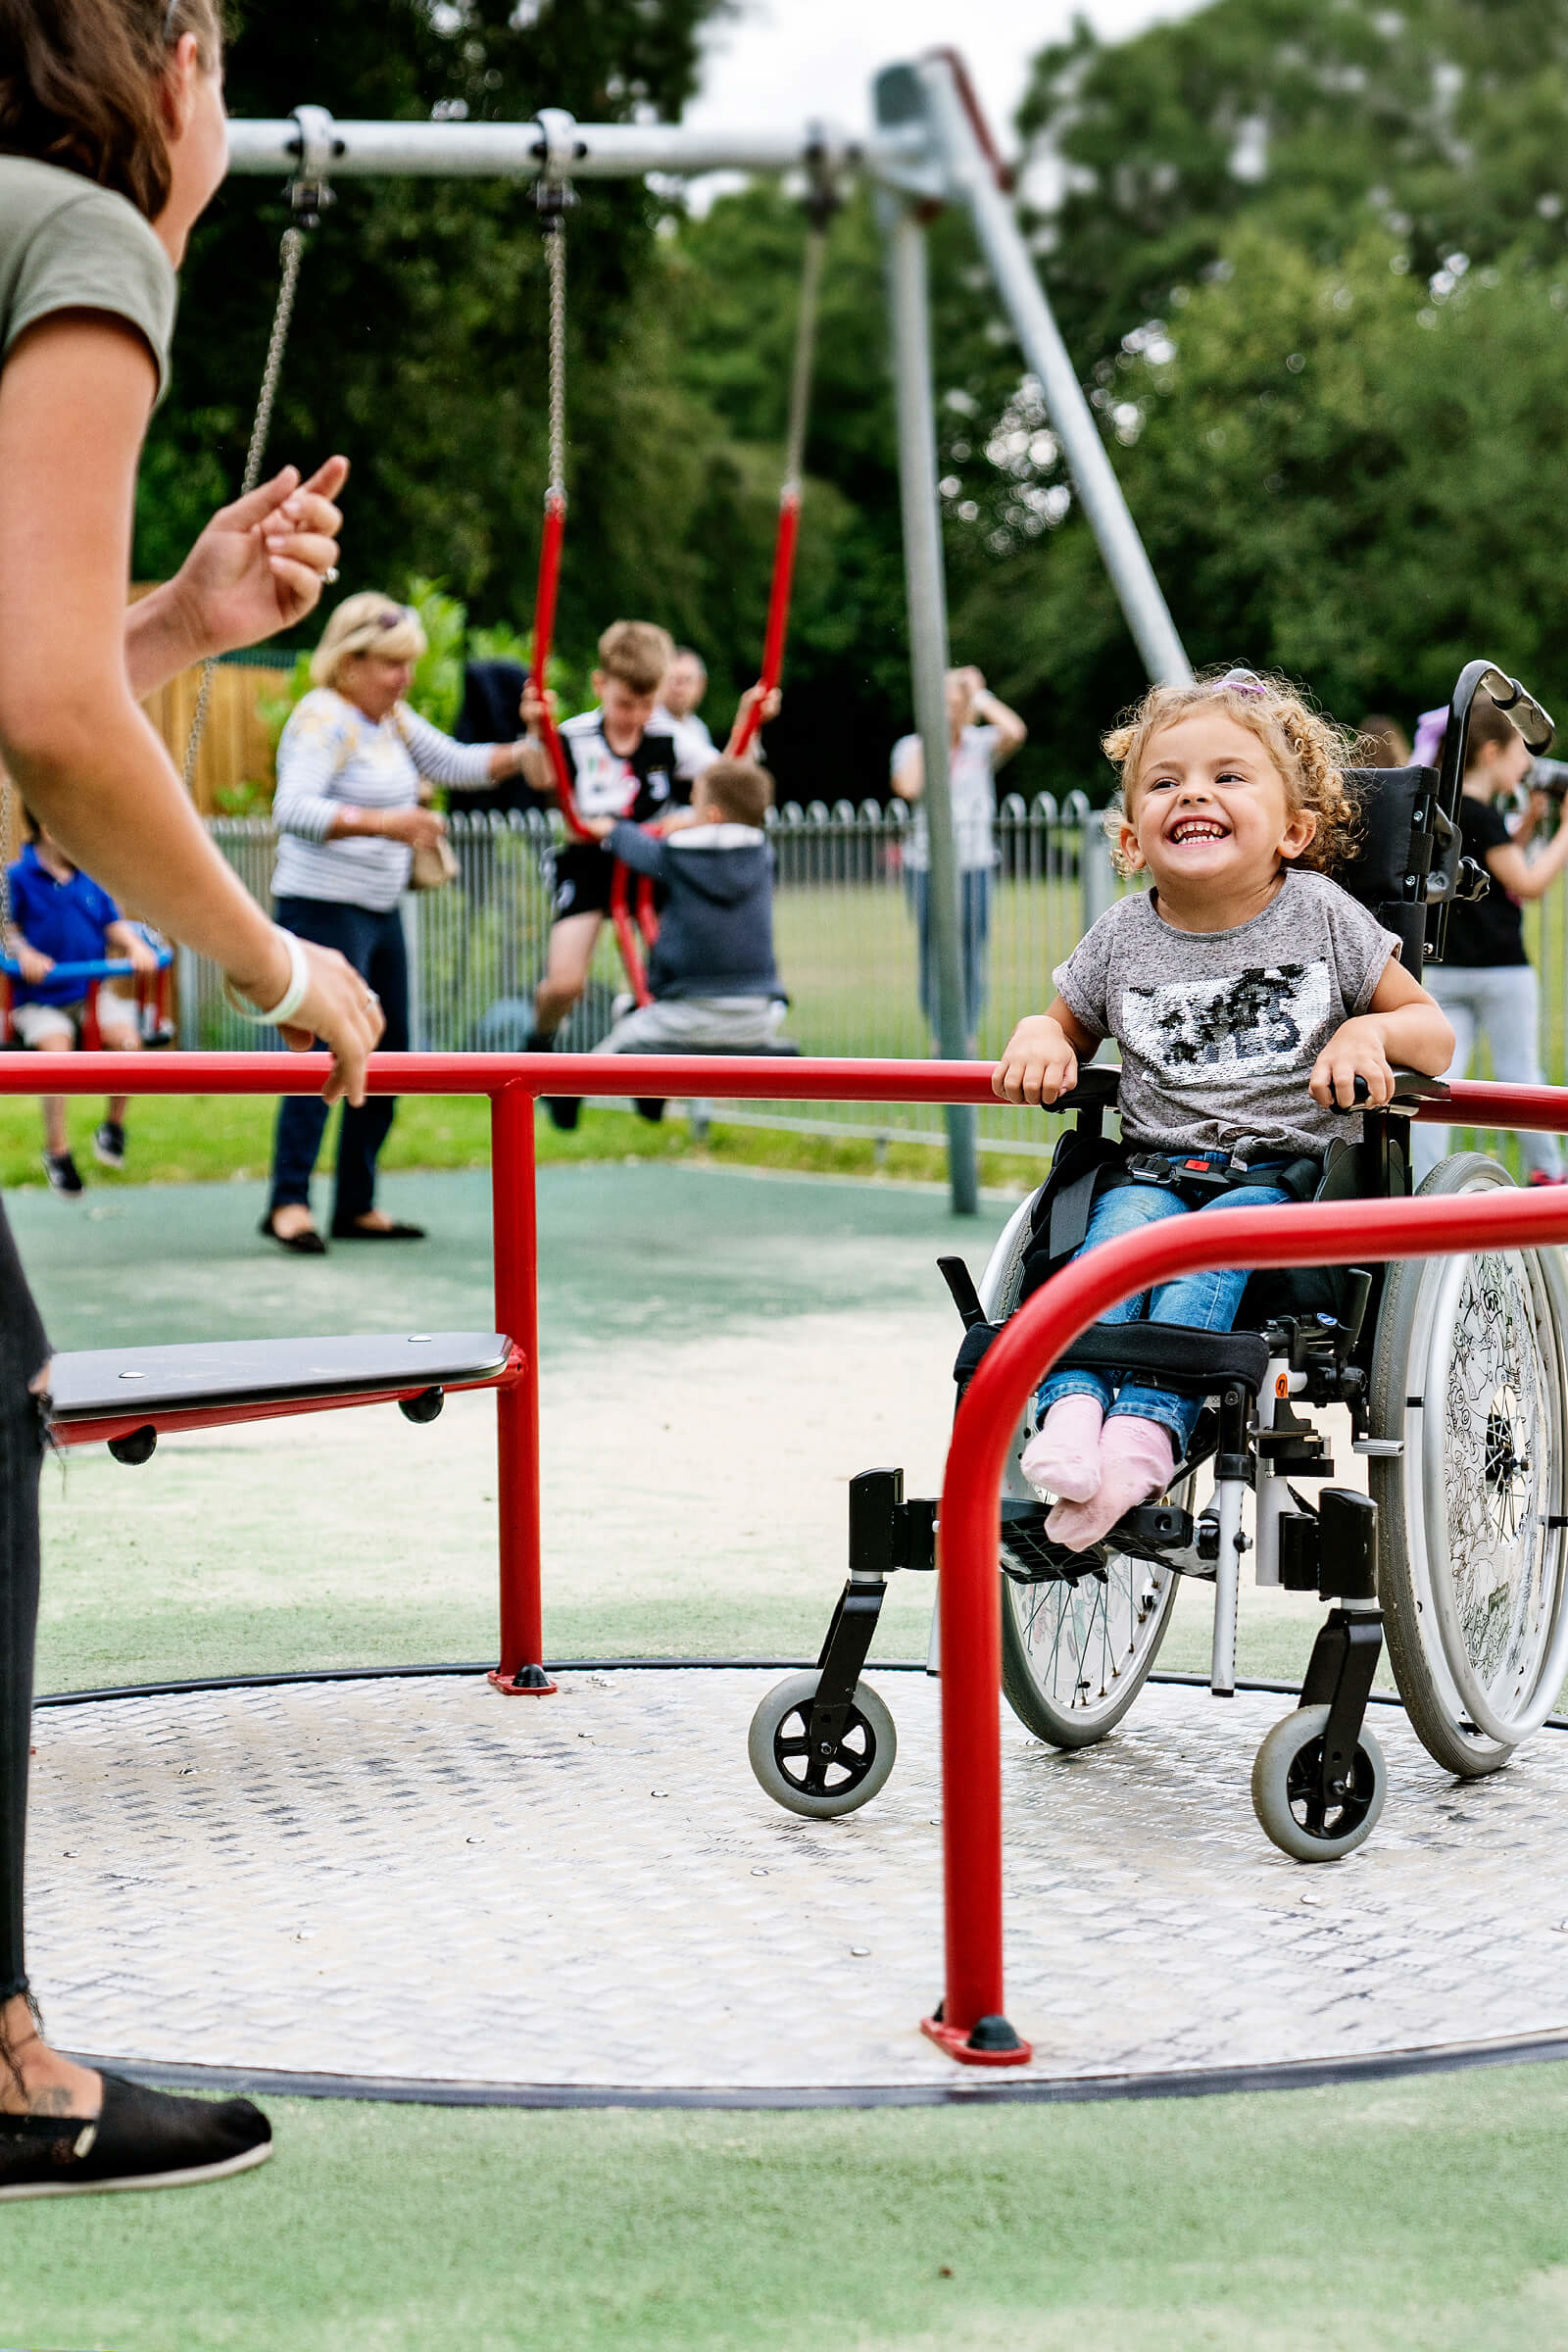 How to design inclusive playgrounds - 5 questions 